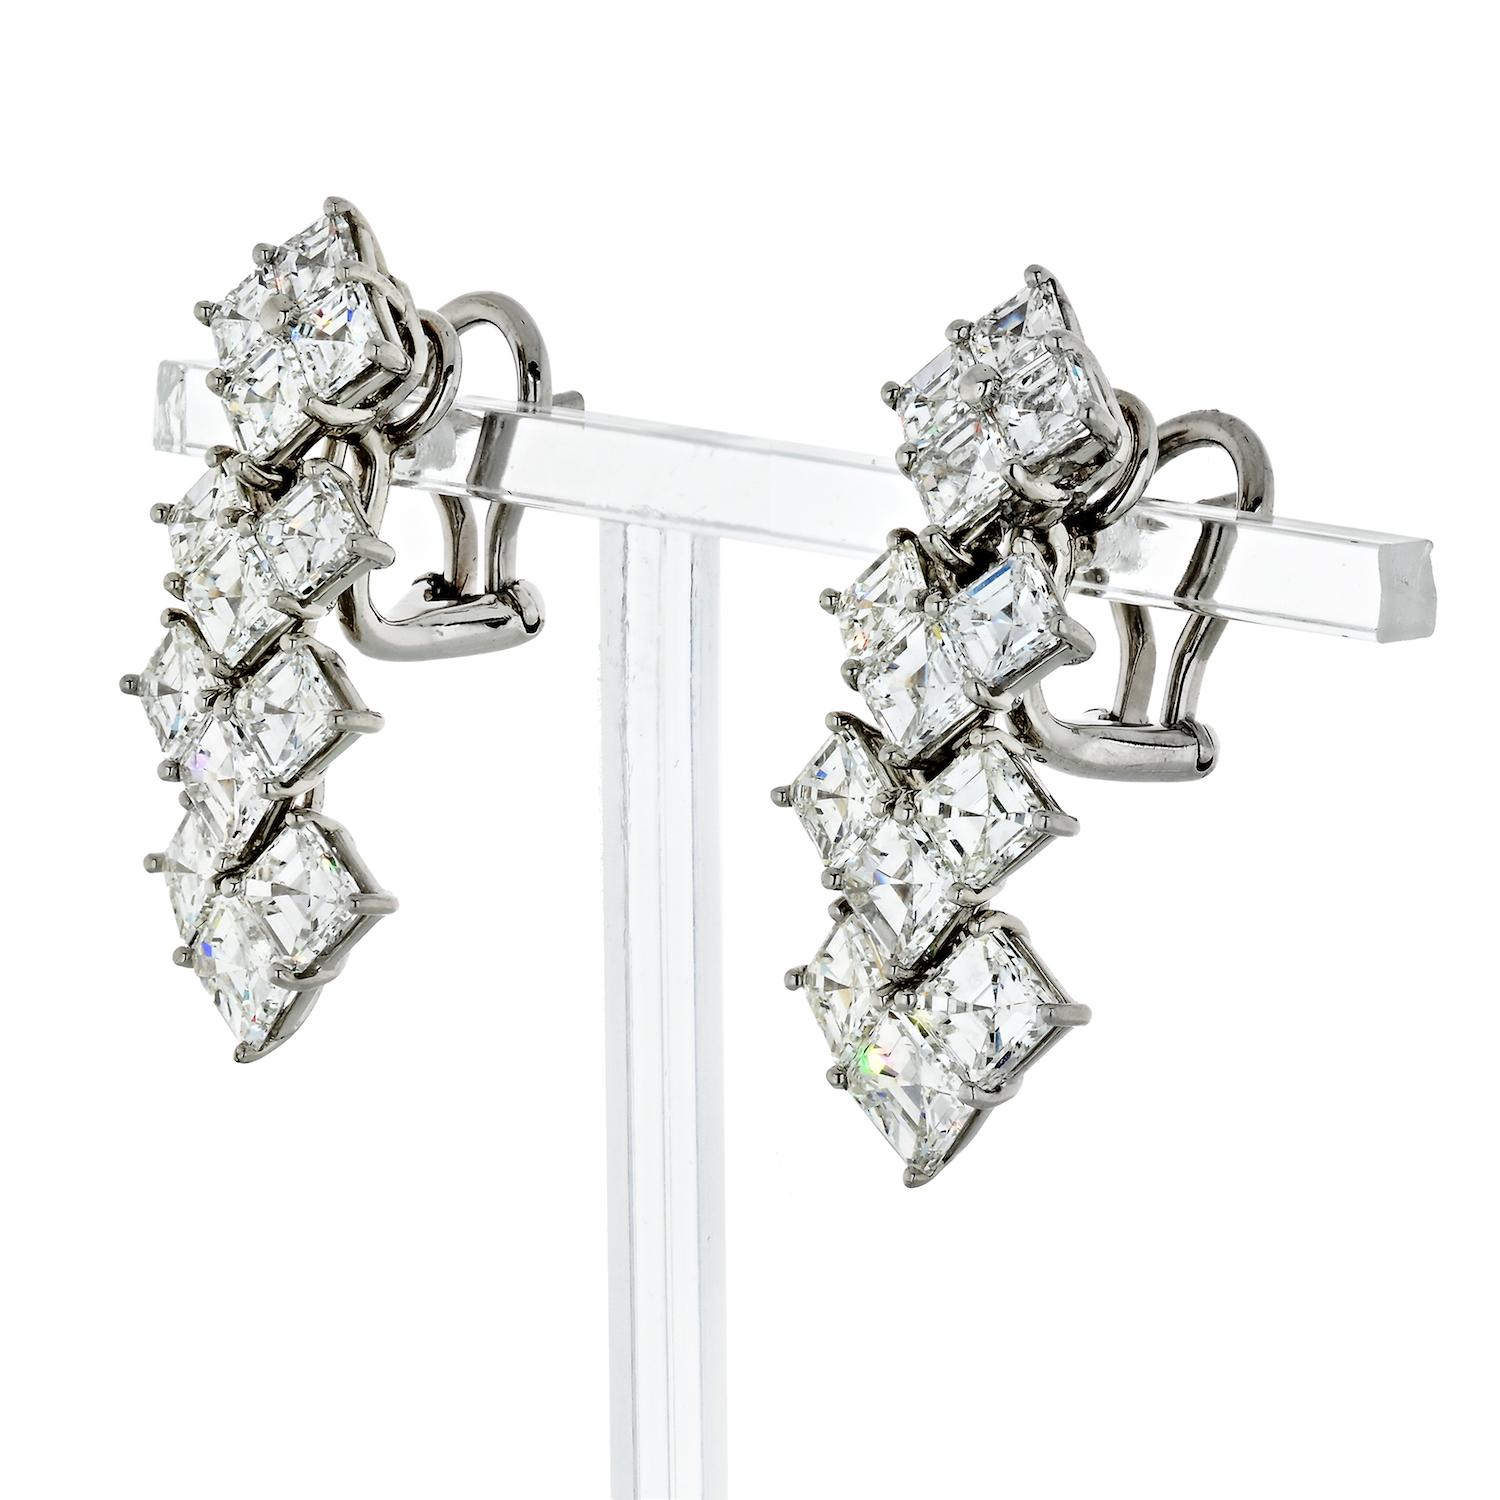 These fine earrings feature 26 white dazzling asscher-cut diamonds. Created in platinum the earrings are thoughtfully designed with an Art Deco flare. These earrings measure approximately 29 mm long and 12mm wide. 
Post with an omega backing. 
26